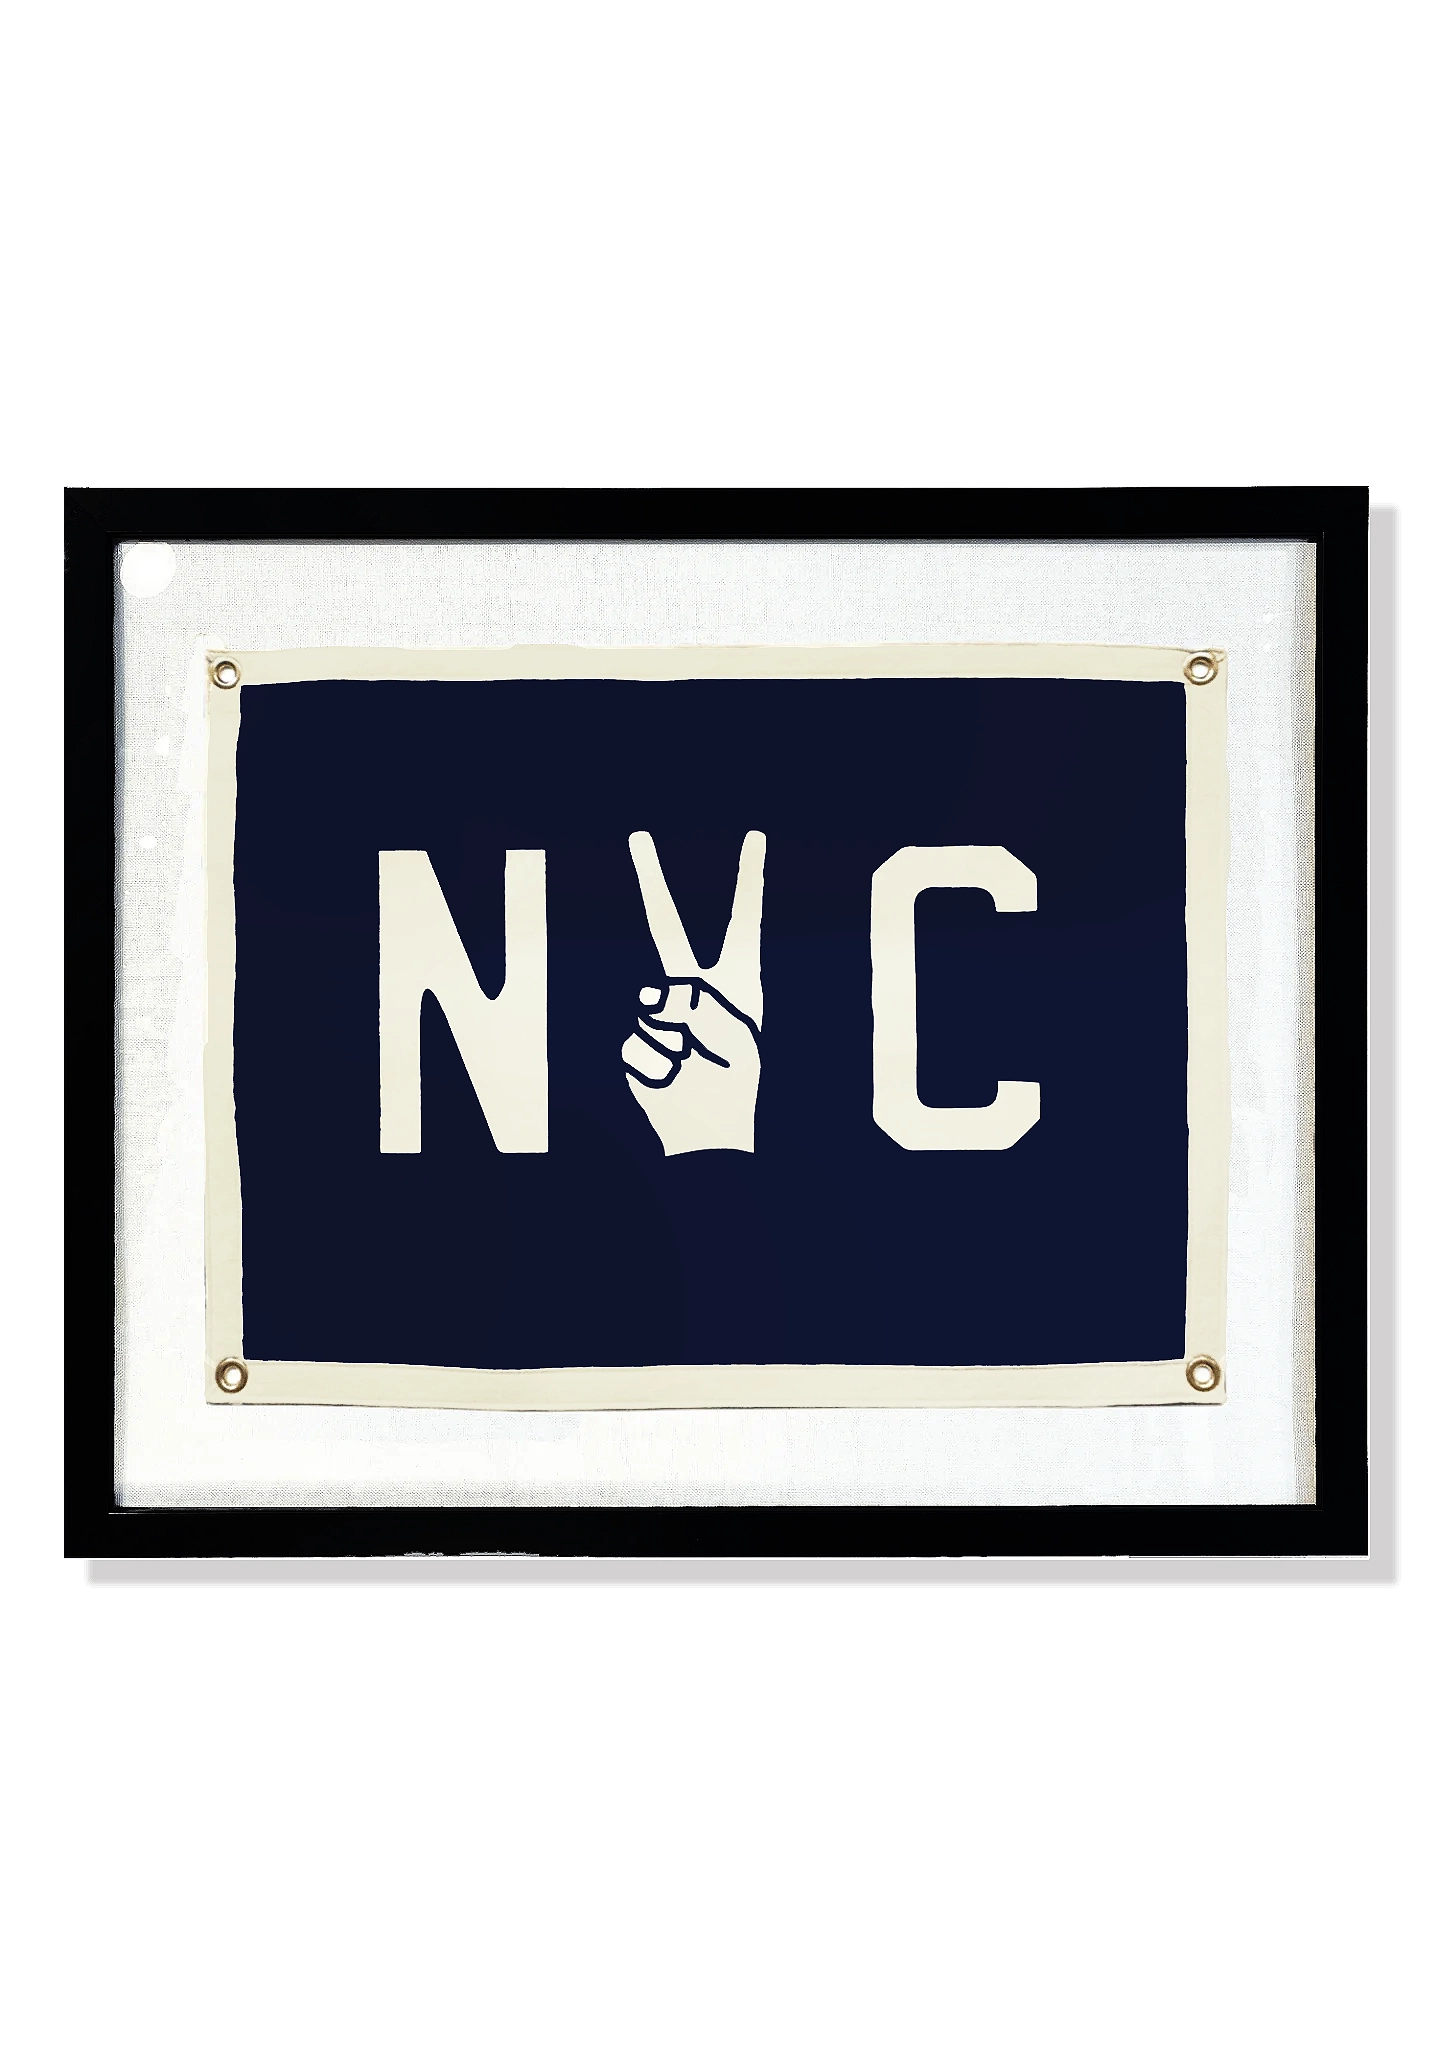 Bensgarden.com | Handcrafted NYC Peace Cut-And-Sewn Wool Felt Pennant Flag - Ben's Garden. Made in New York City.